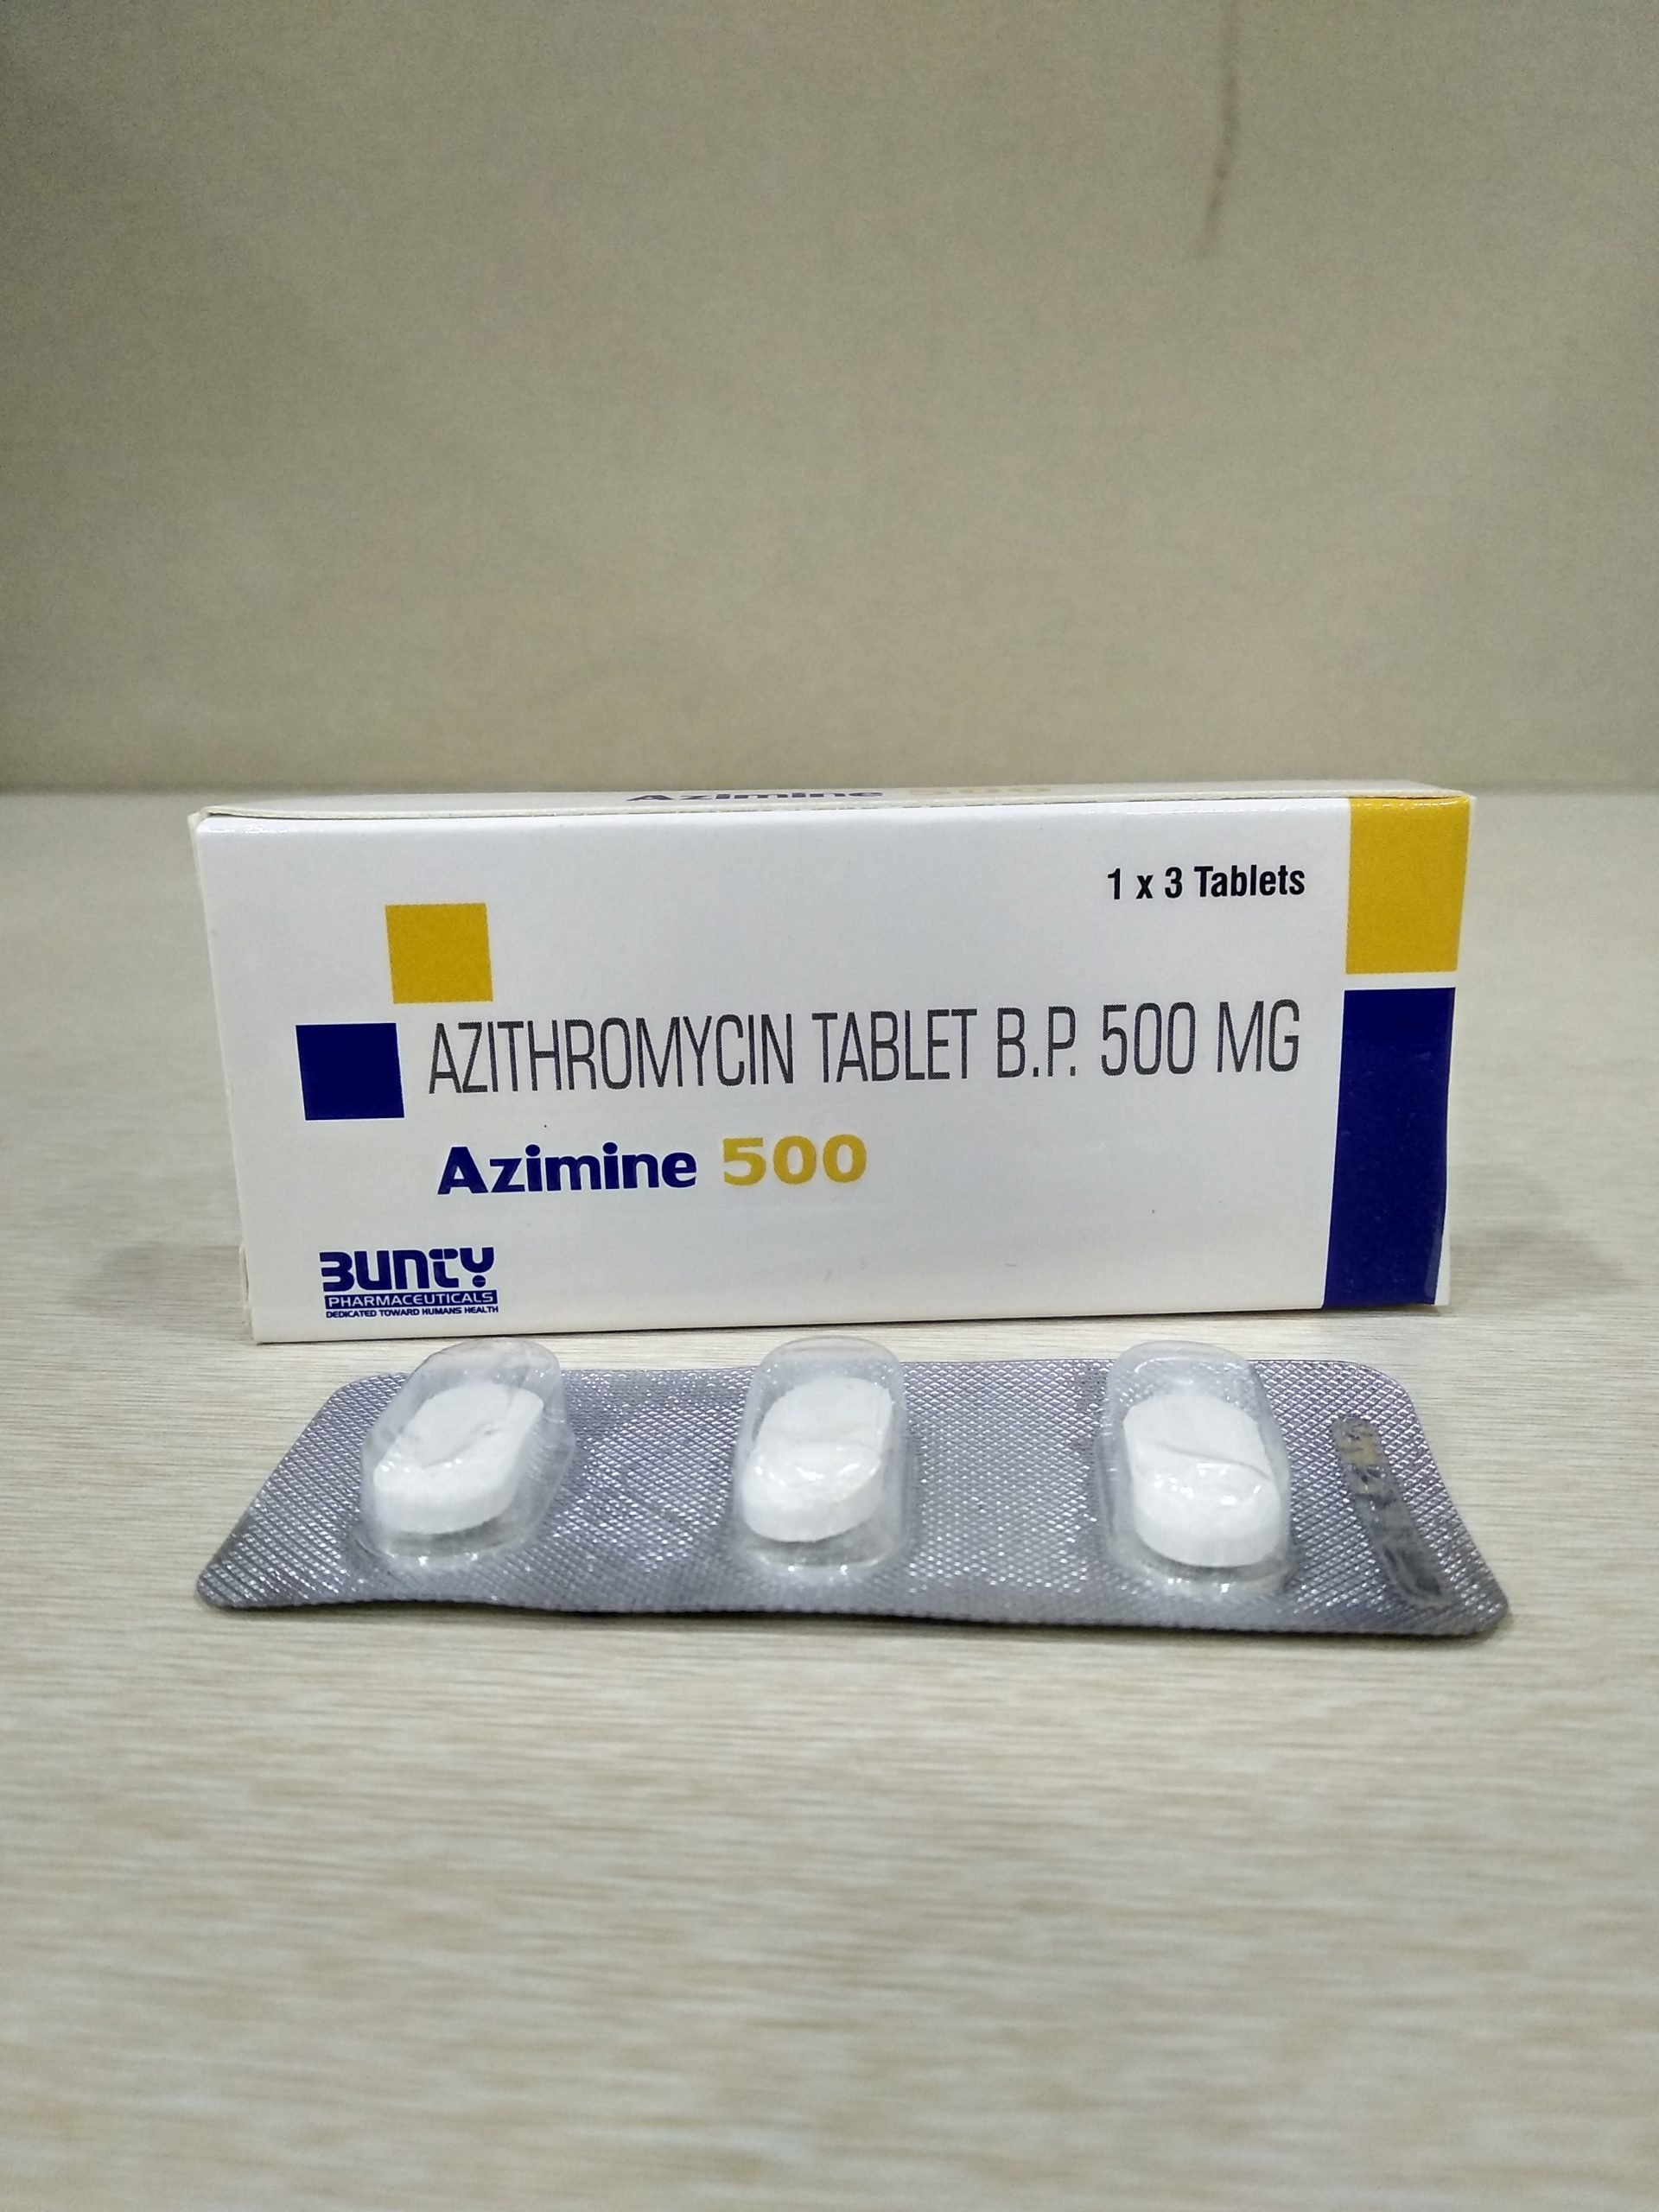 Azithromycin Tablets 500 MG Manufacturer, Supplier in ...